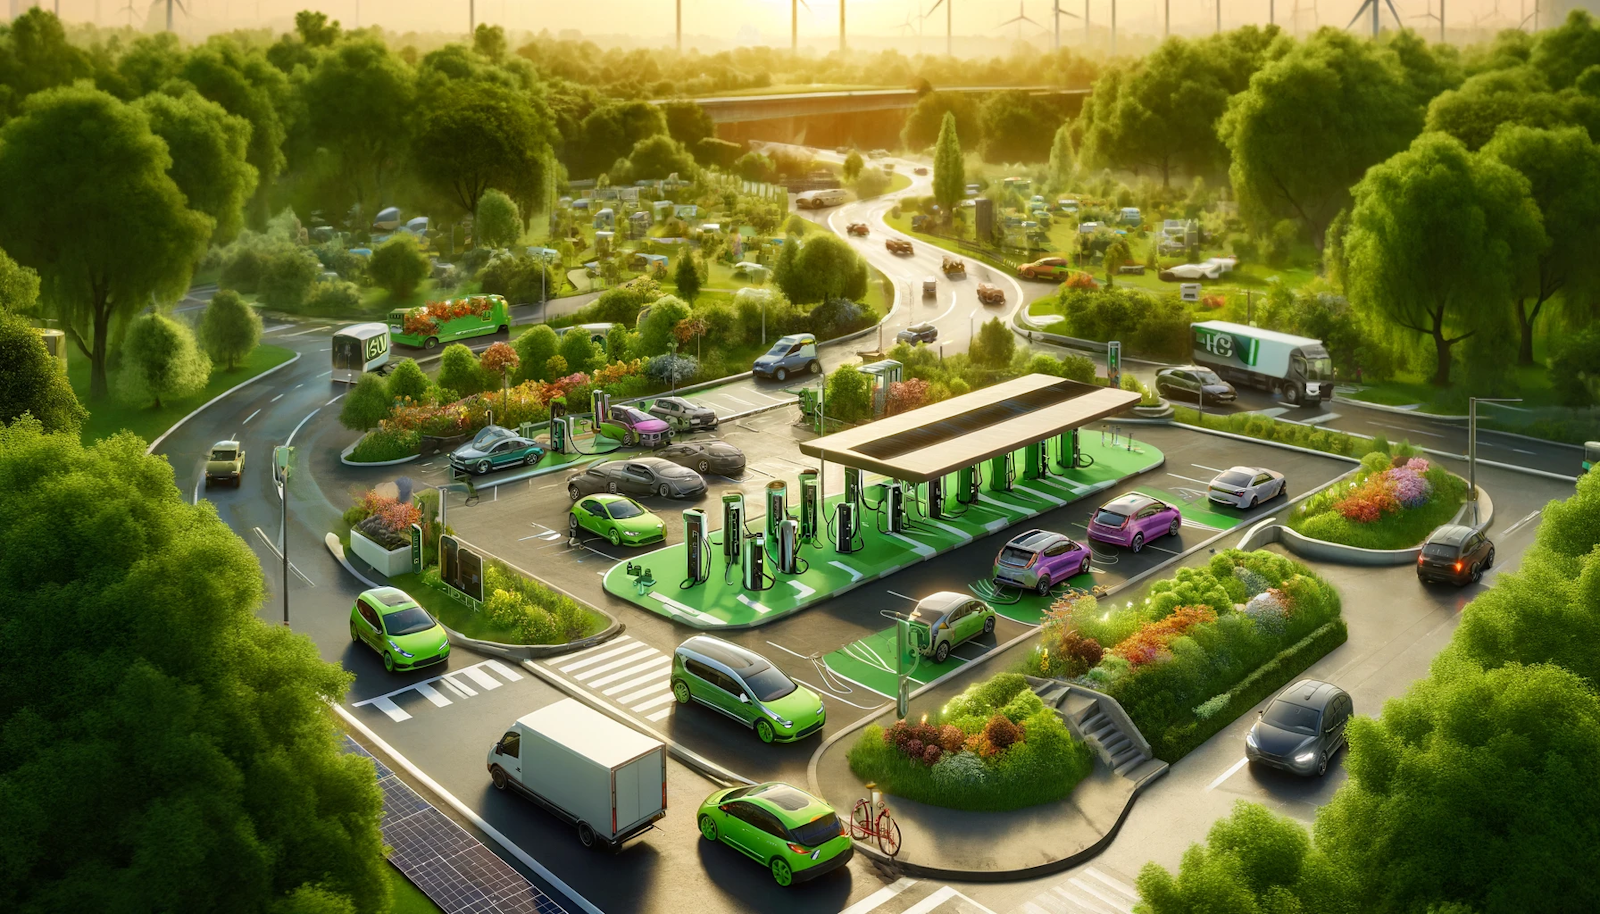 Urban electric vehicle (EV) charging station surrounded by lush greenery in a park-like setting, with cars charging under solar panels and wind turbines in the background, highlighting sustainable urban mobility.